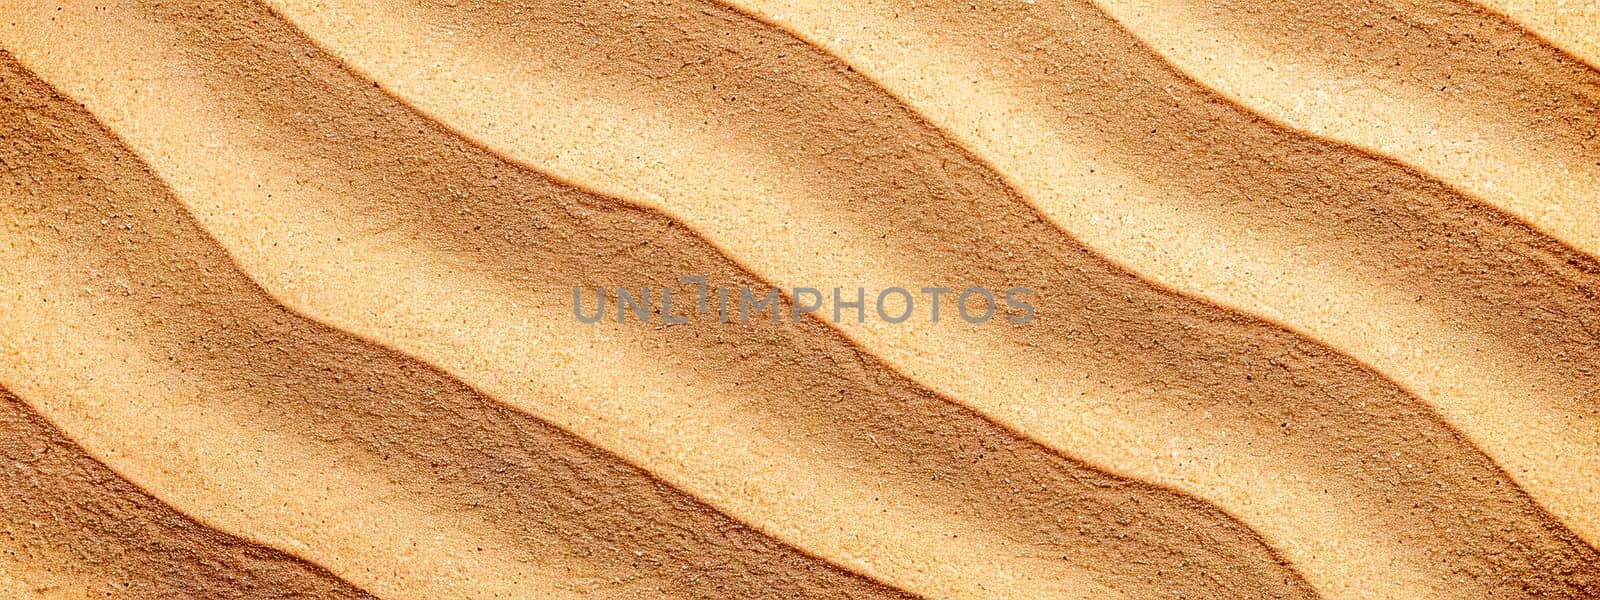 High-resolution image of wavy sand dunes pattern, suitable for backgrounds by Edophoto